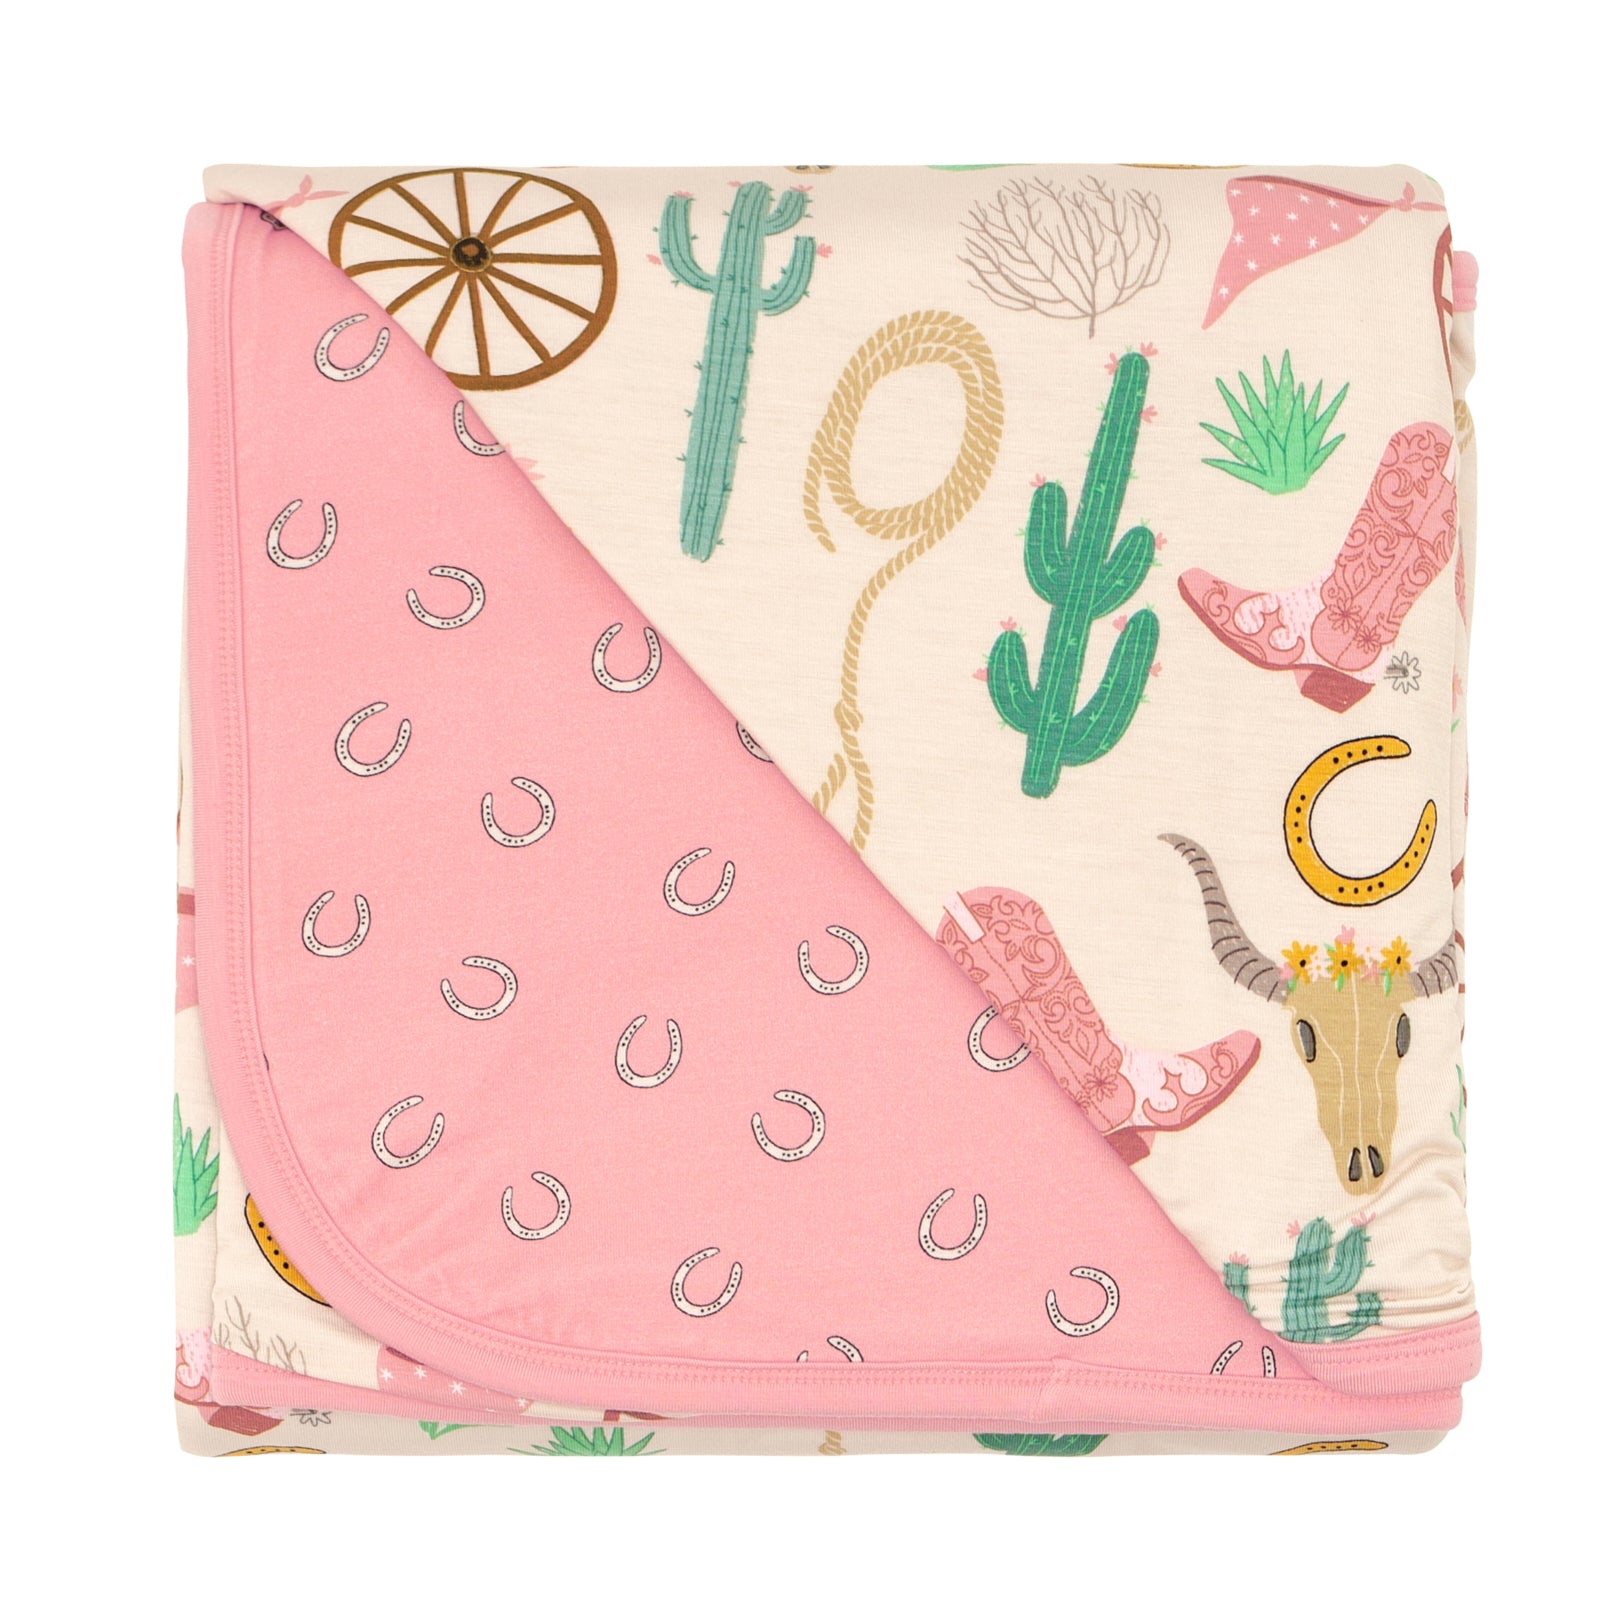 Flat lay image of a Pink Ready to Rodeo large cloud blanket showing off the printed backing